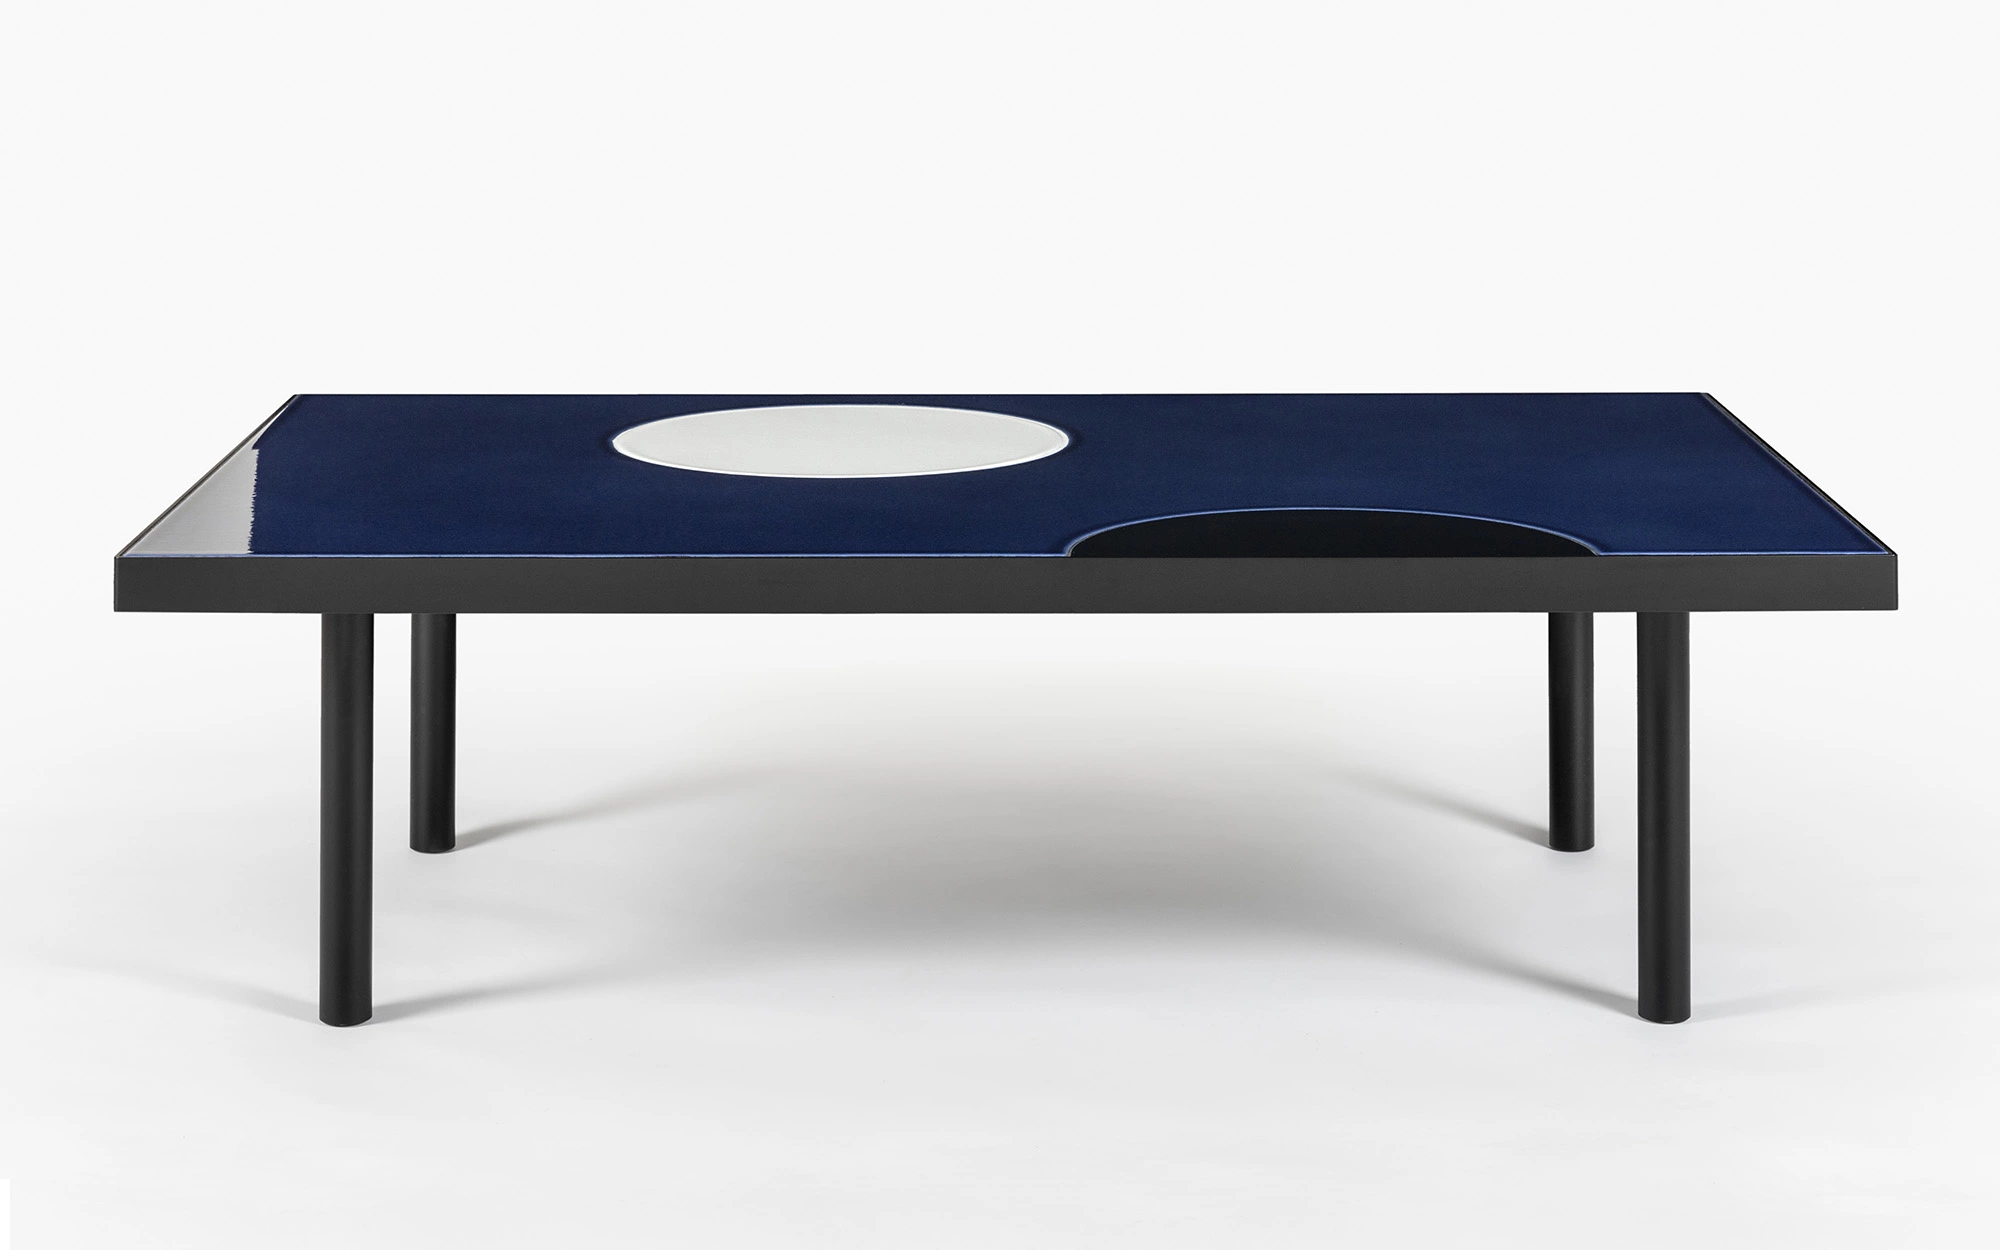 Translation Discolo Coffee Table - Pierre Charpin - Table light - Galerie kreo